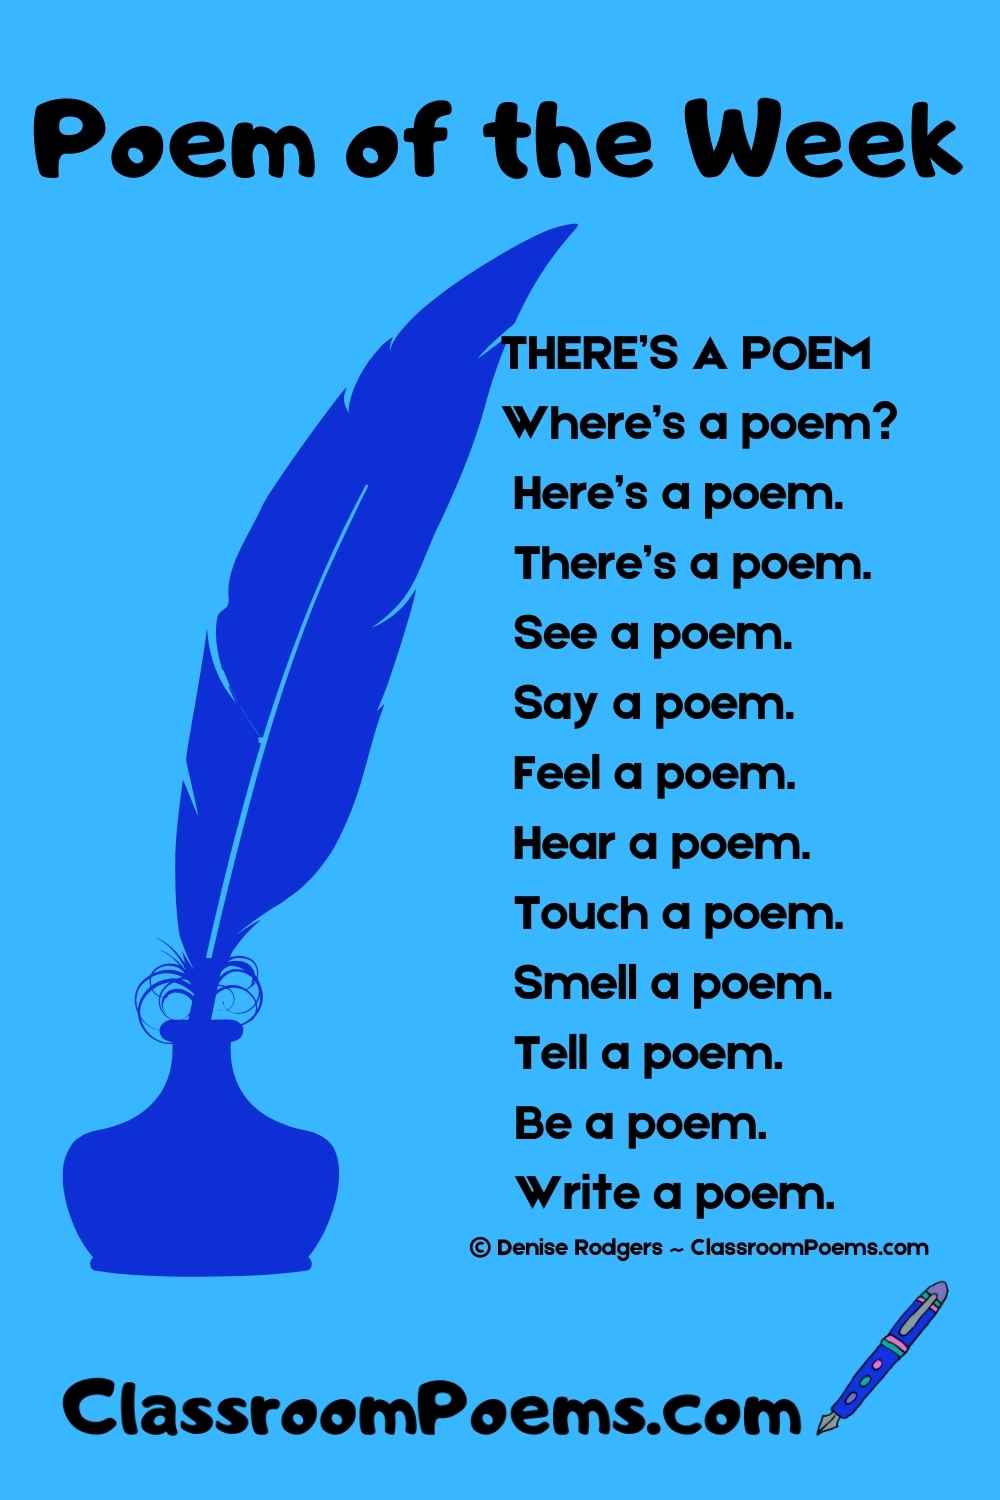 A poetry poem featured on the Poem of the Week page, by Denise Rodgers on ClassroomPoems.com.